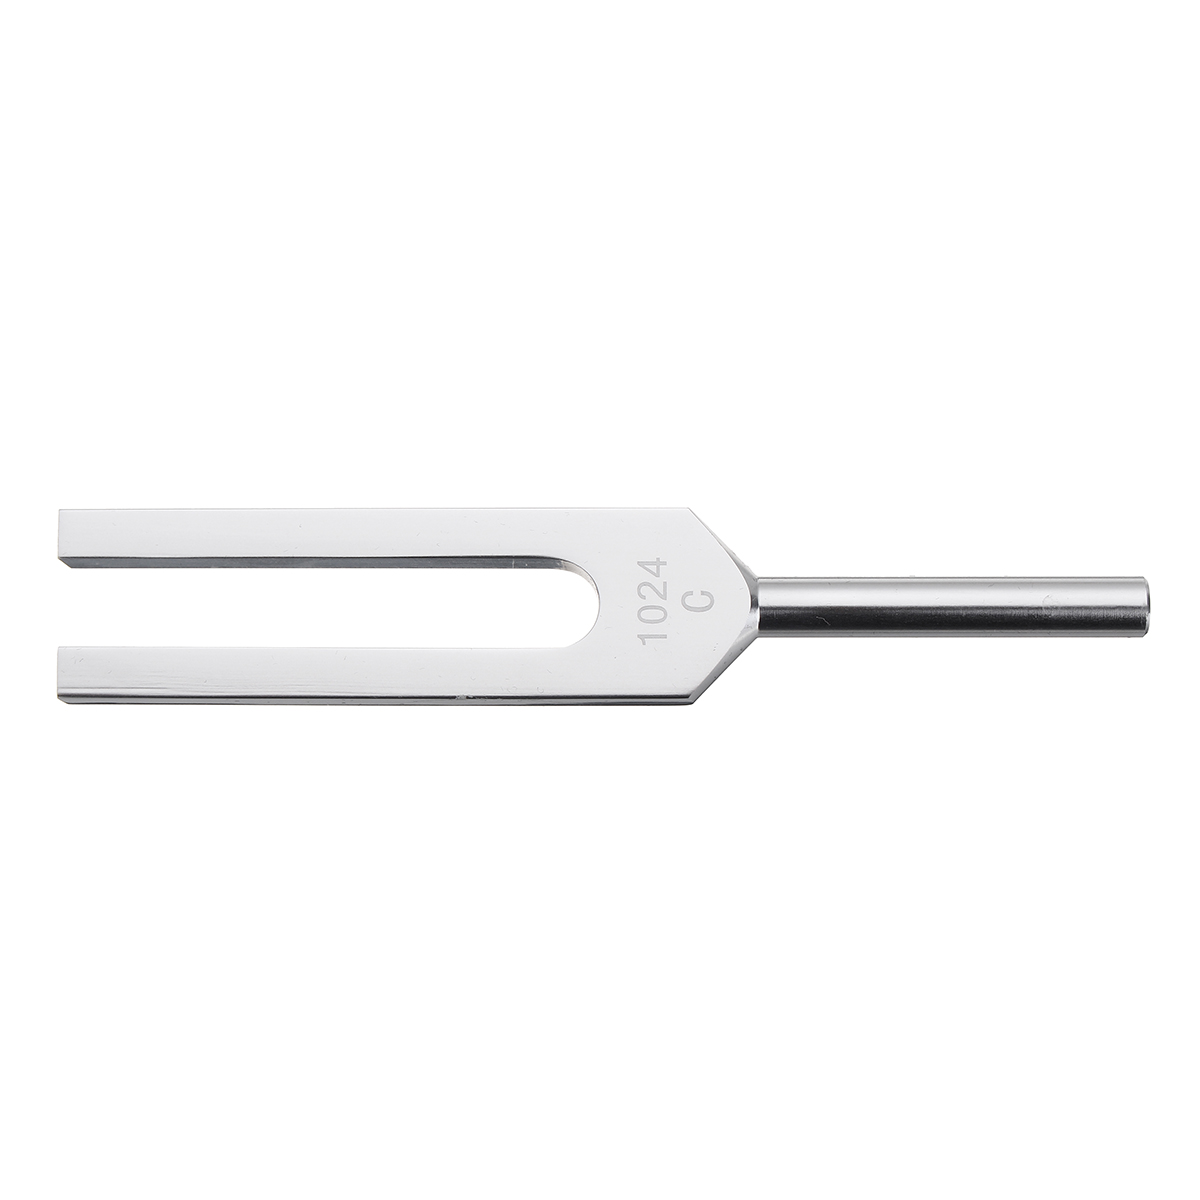 1024HZ-Aluminum-Medical-Tuning-Fork-With-Malle-1428702-7